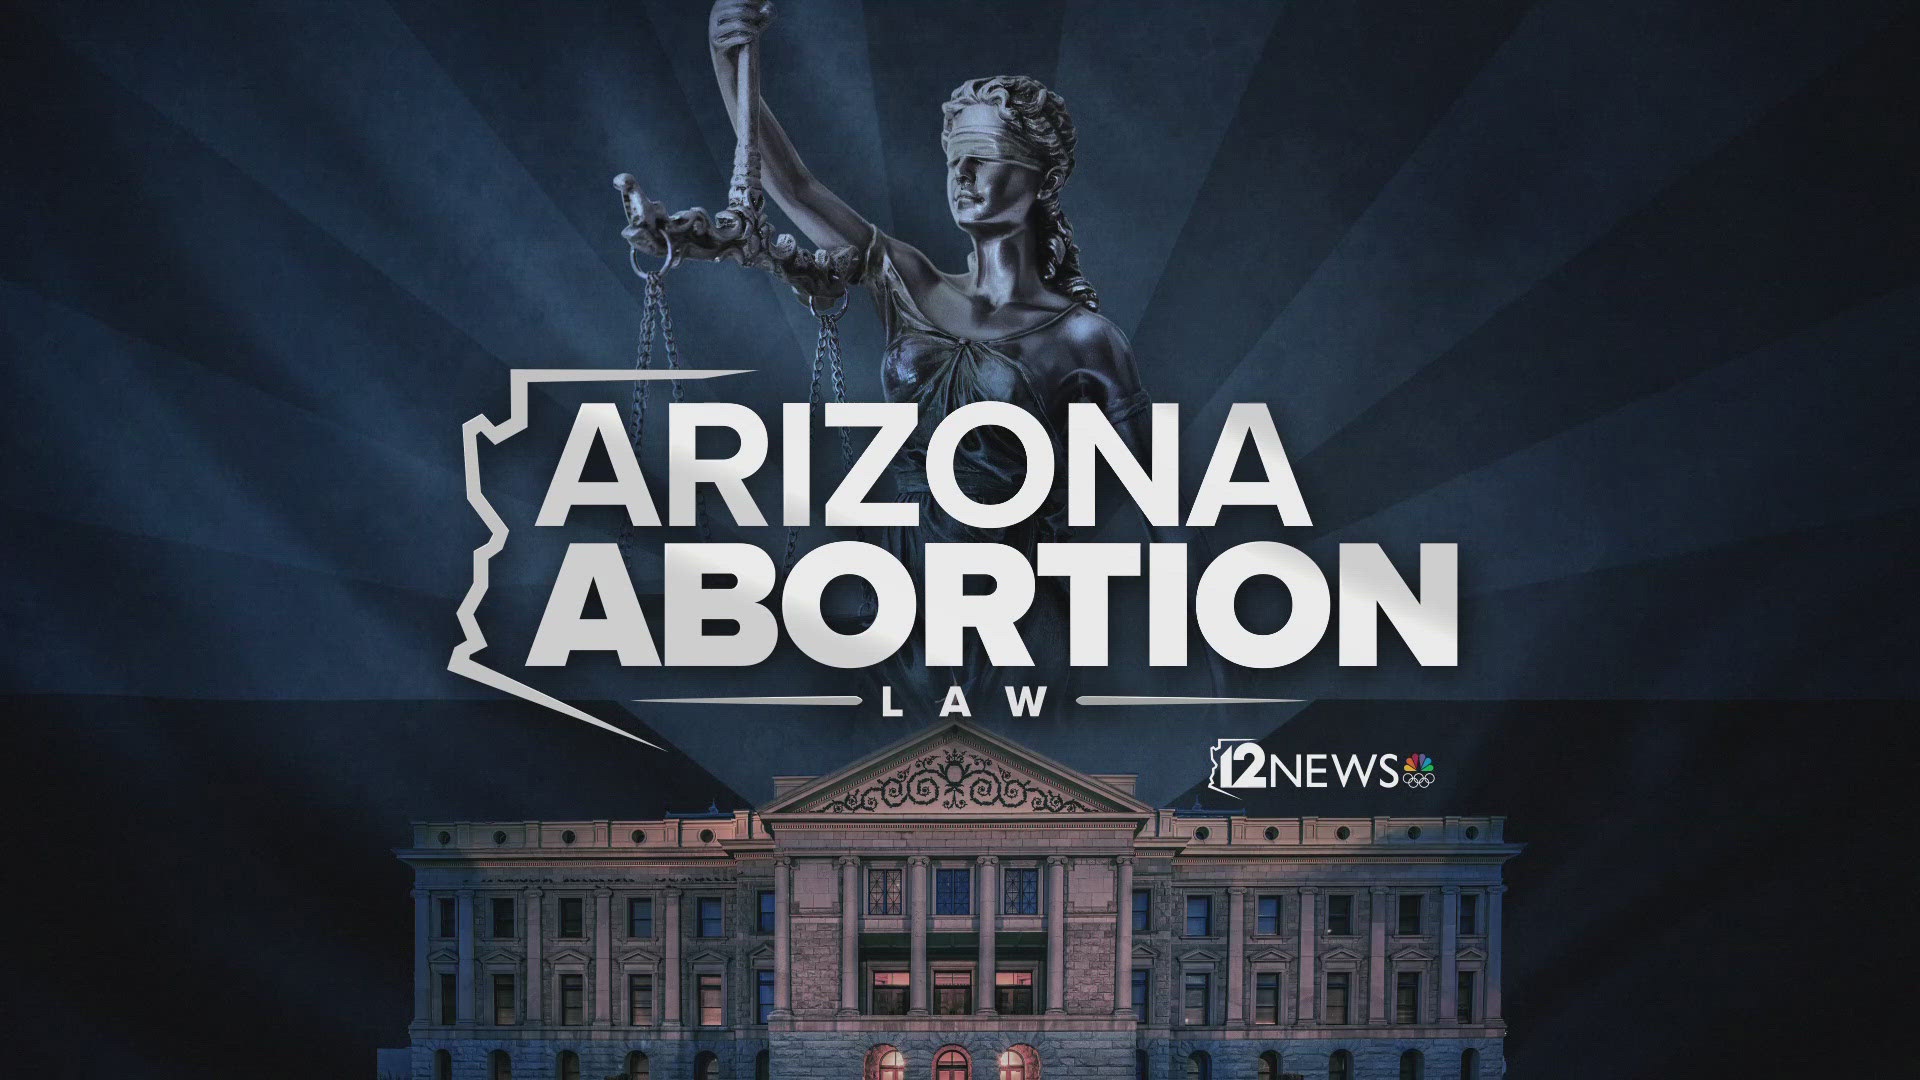 The Arizona Senate is expected to vote on a bill to repeal the 1864 abortion ban in the state.